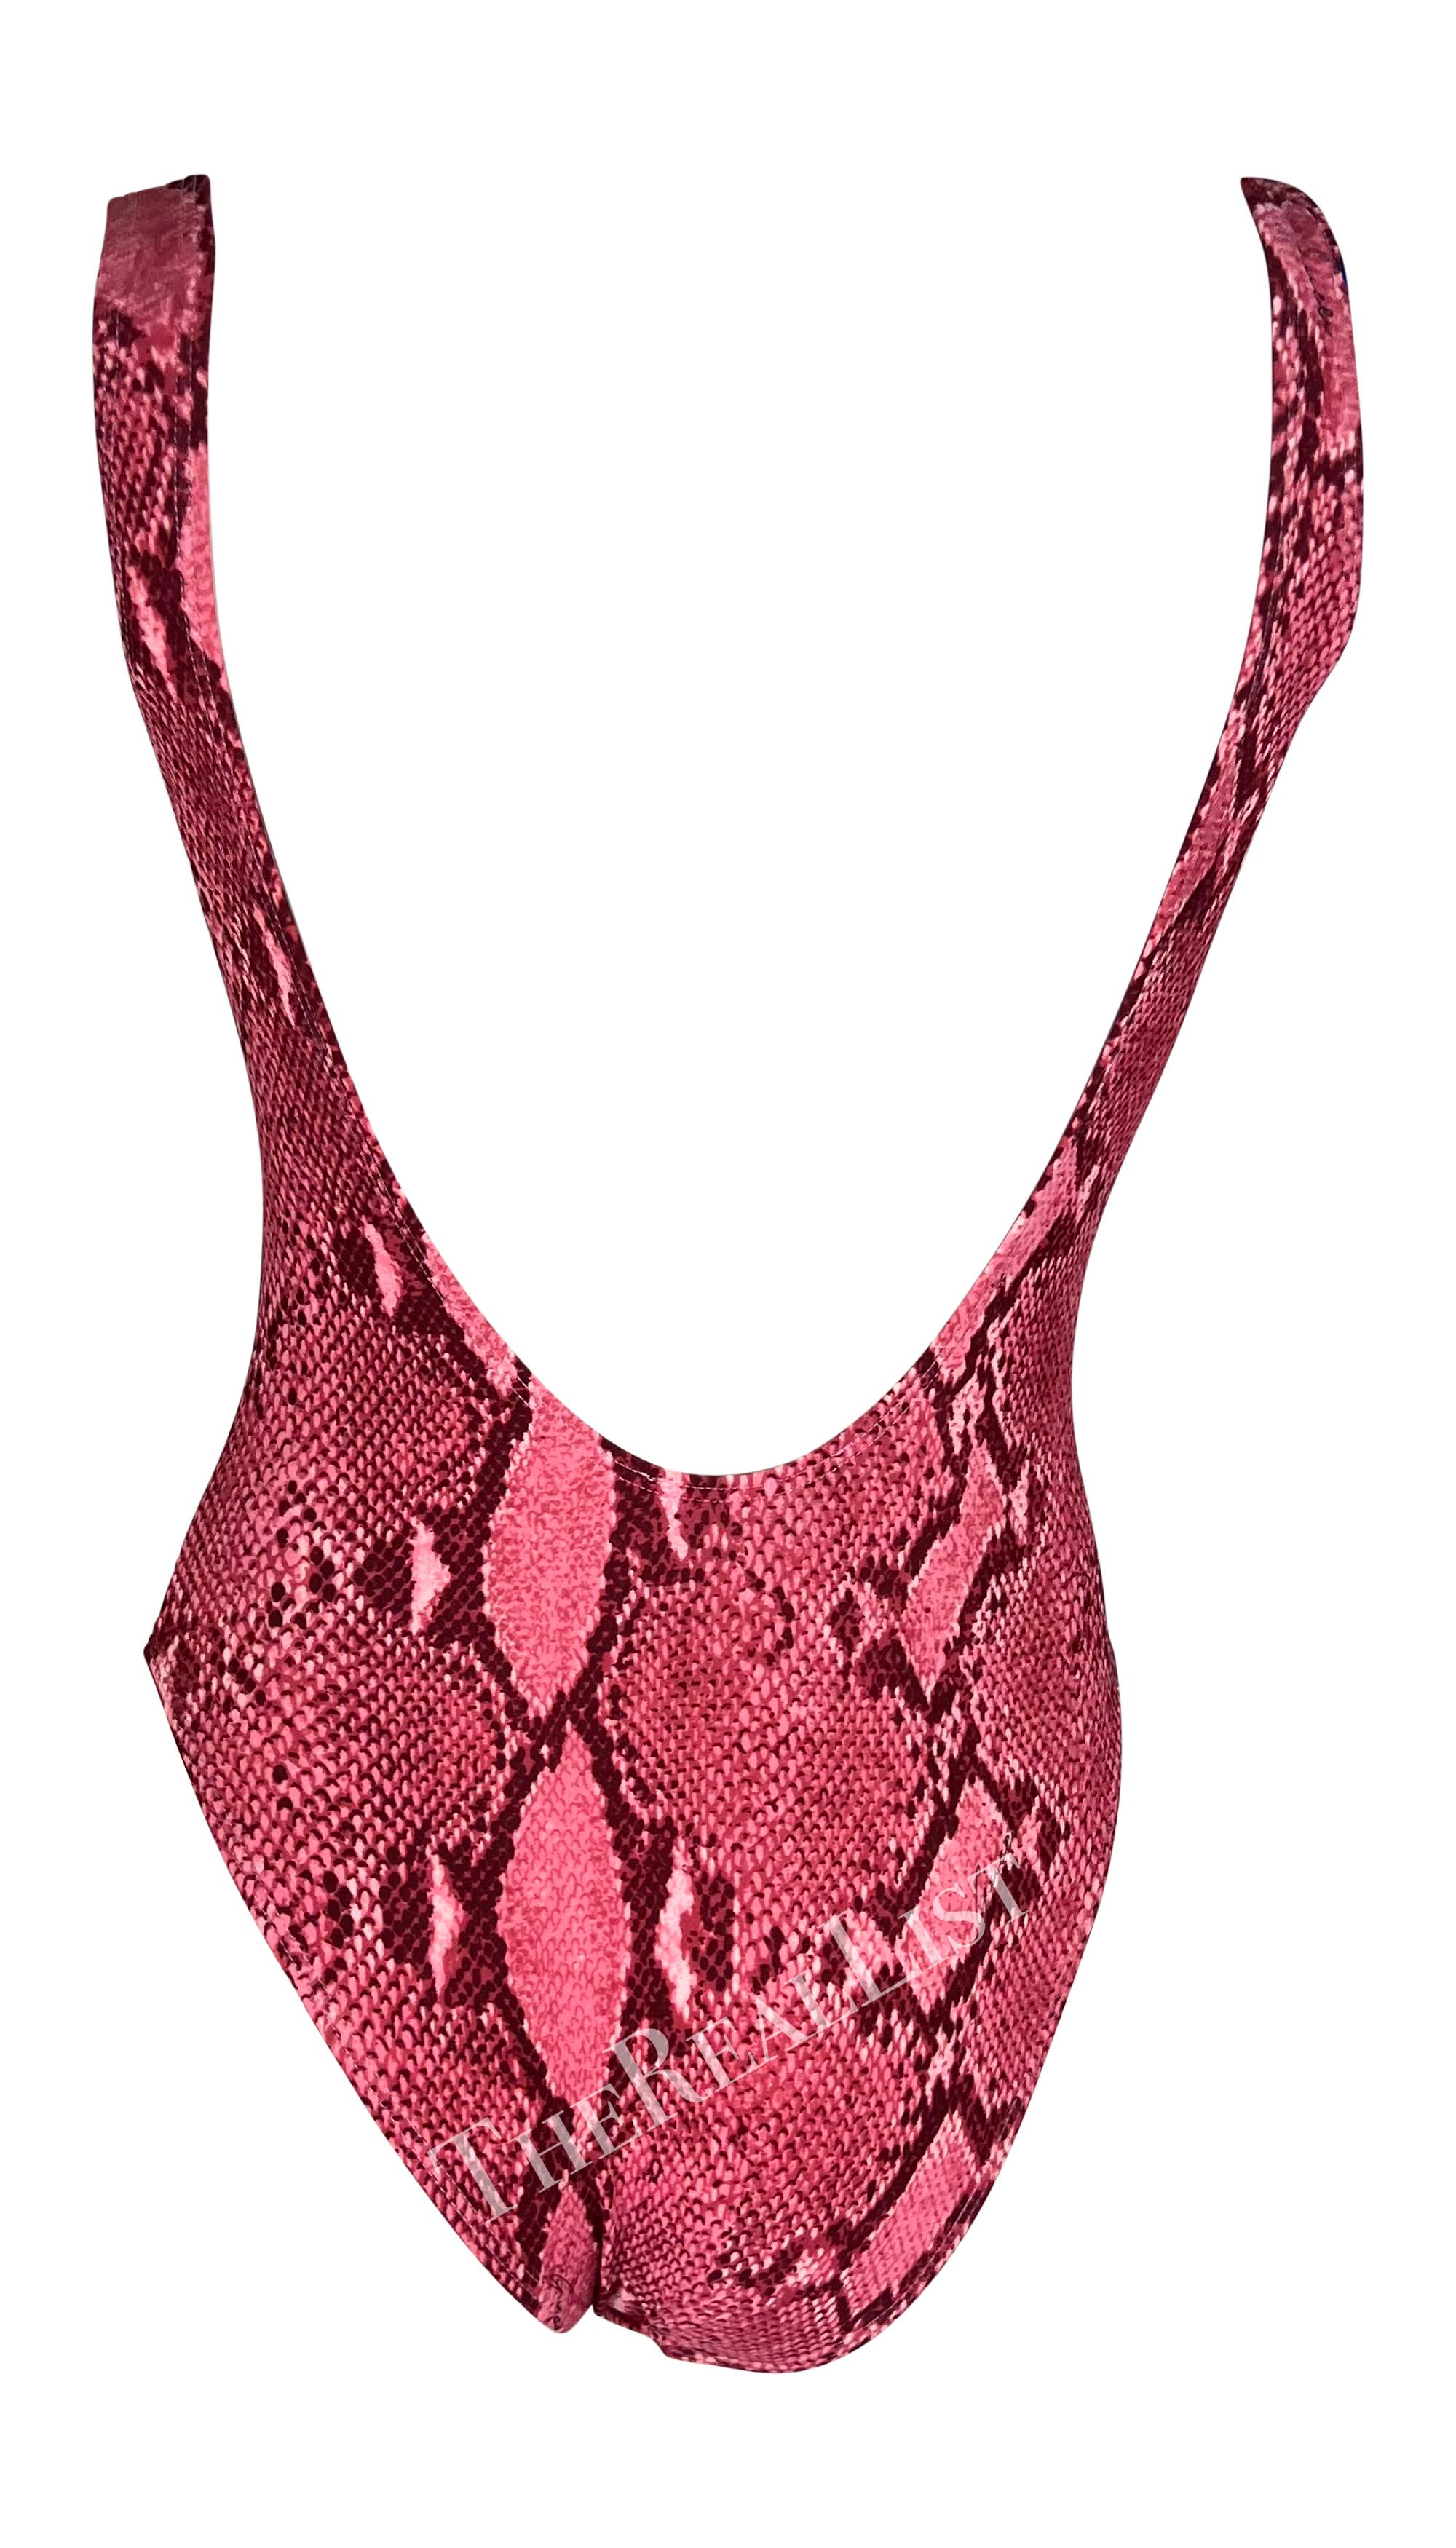 S/S 2000 Gucci by Tom Ford Pink Snakeskin Print One Piece Swimsuit Bodysuit For Sale 1